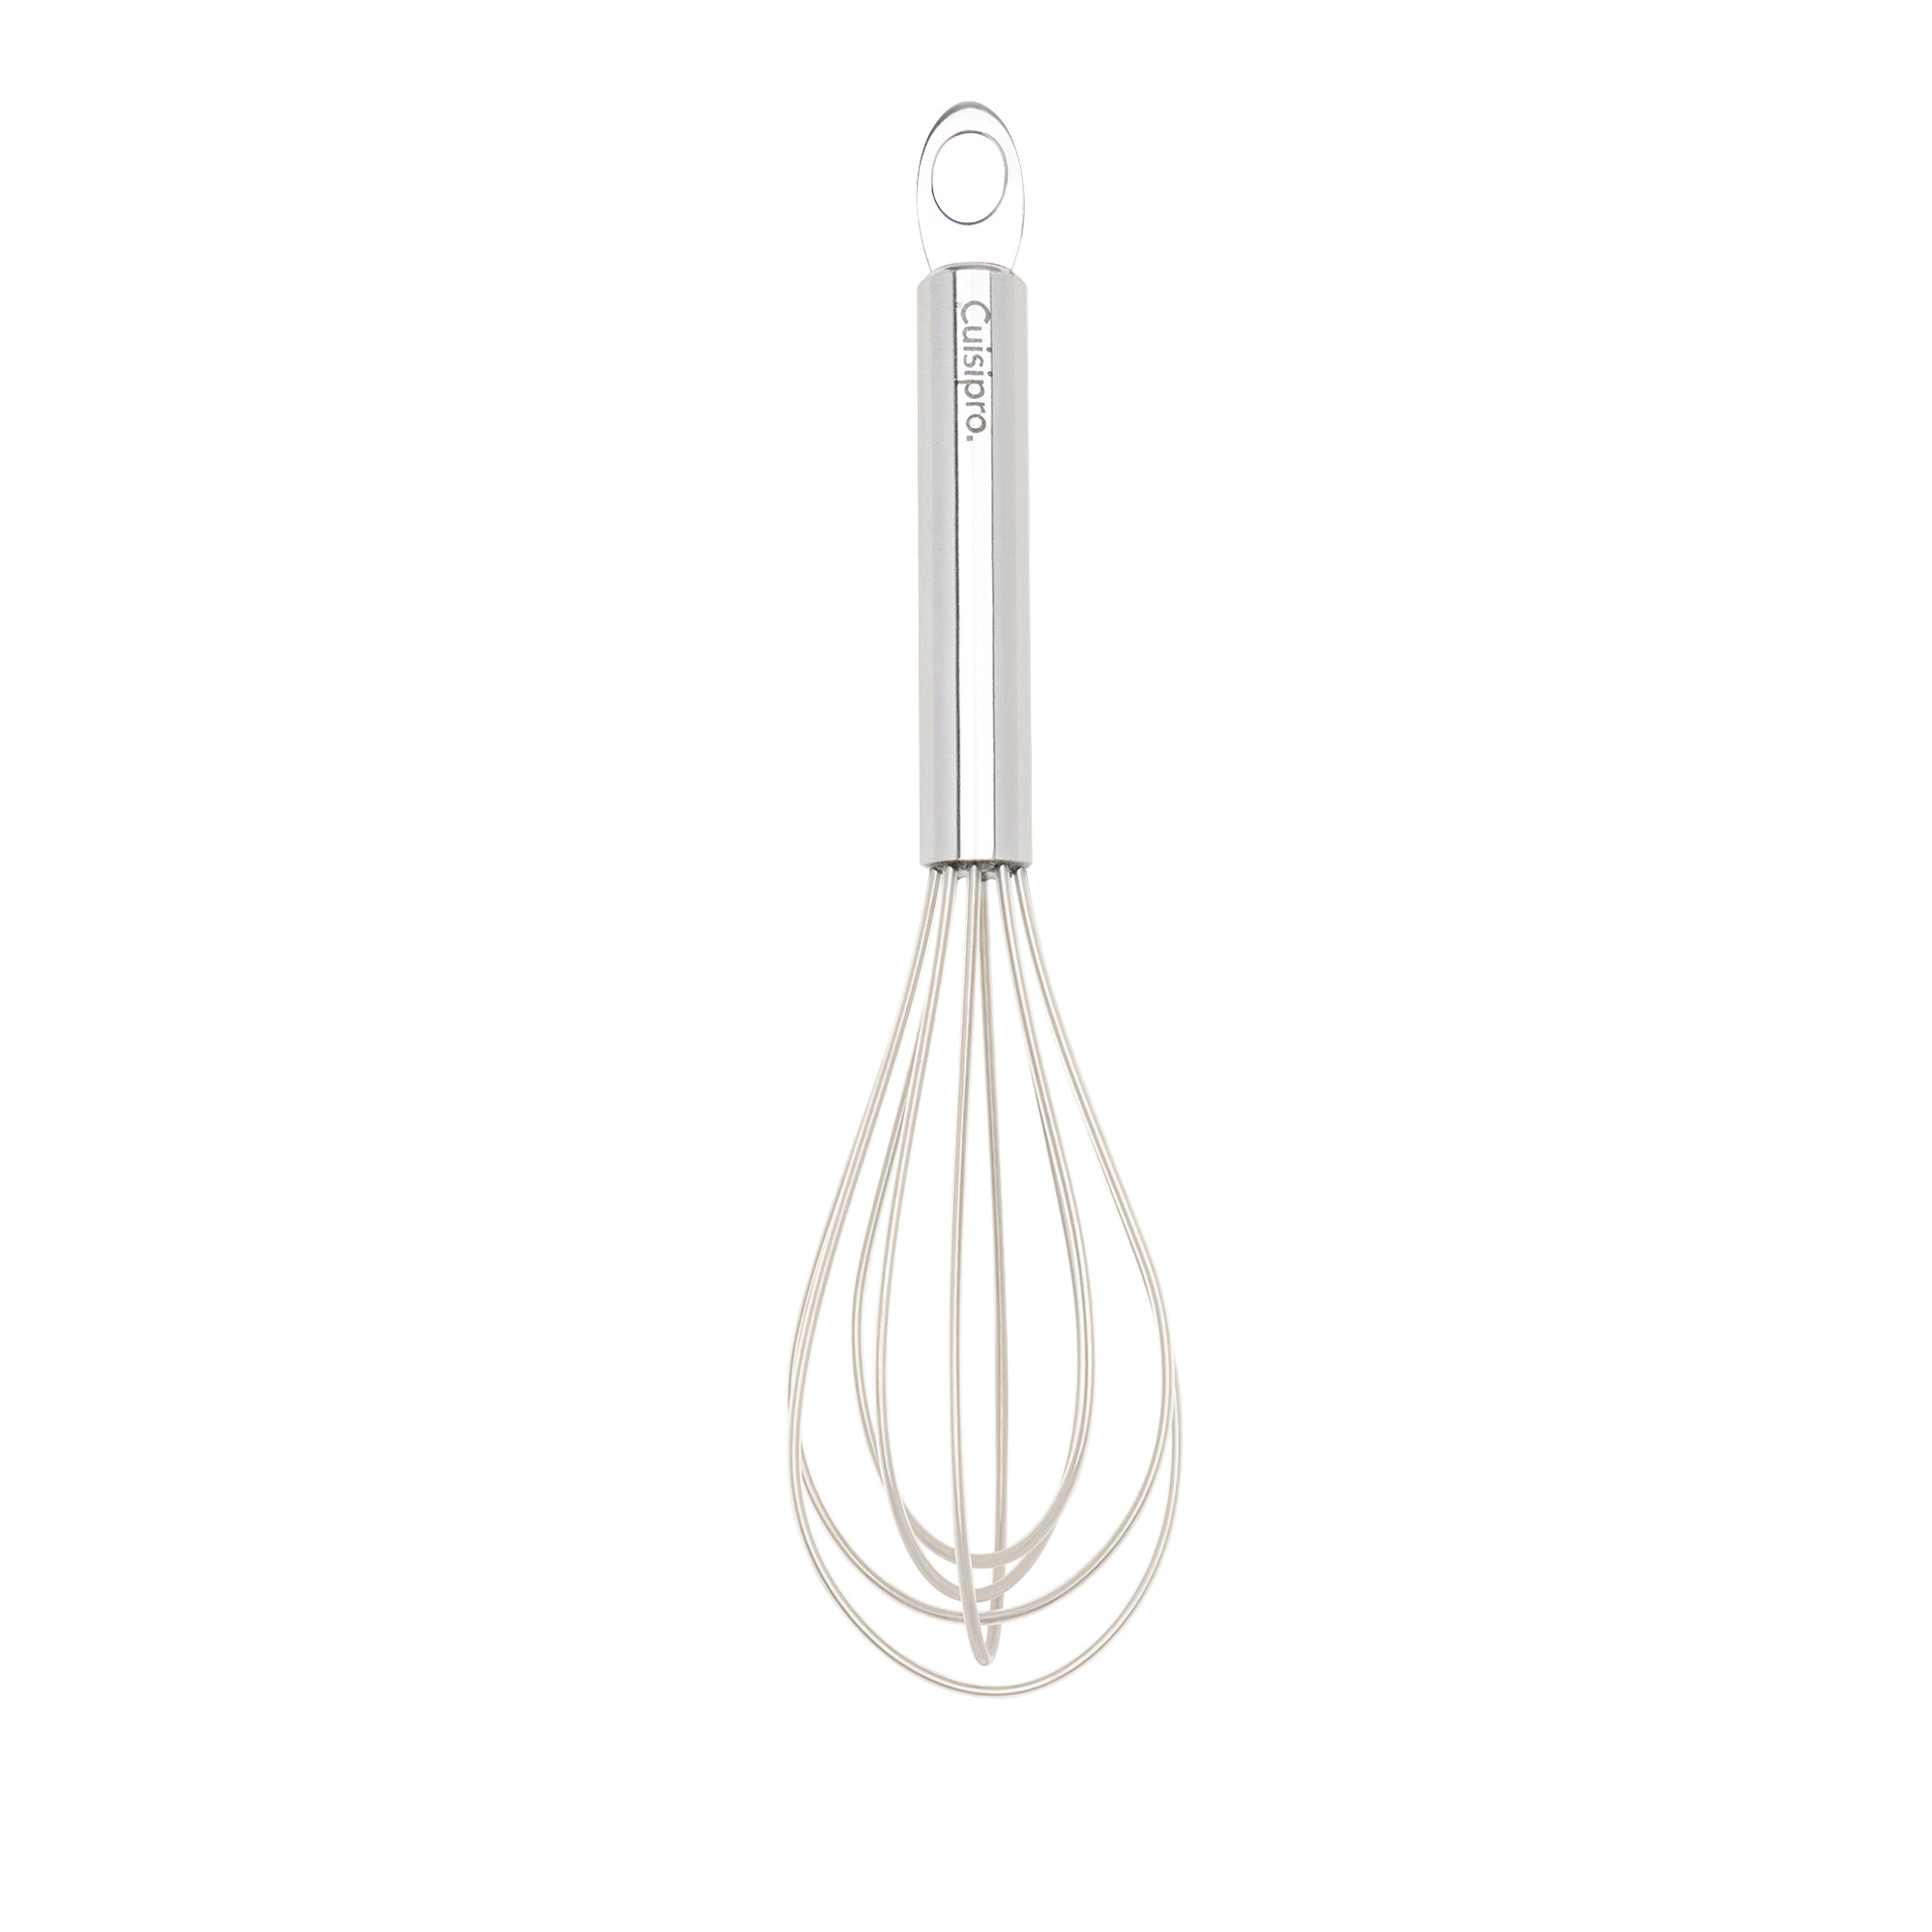 Cuisipro Frosted Silicone Egg Whisk, 8 Inch - image 1 of 3